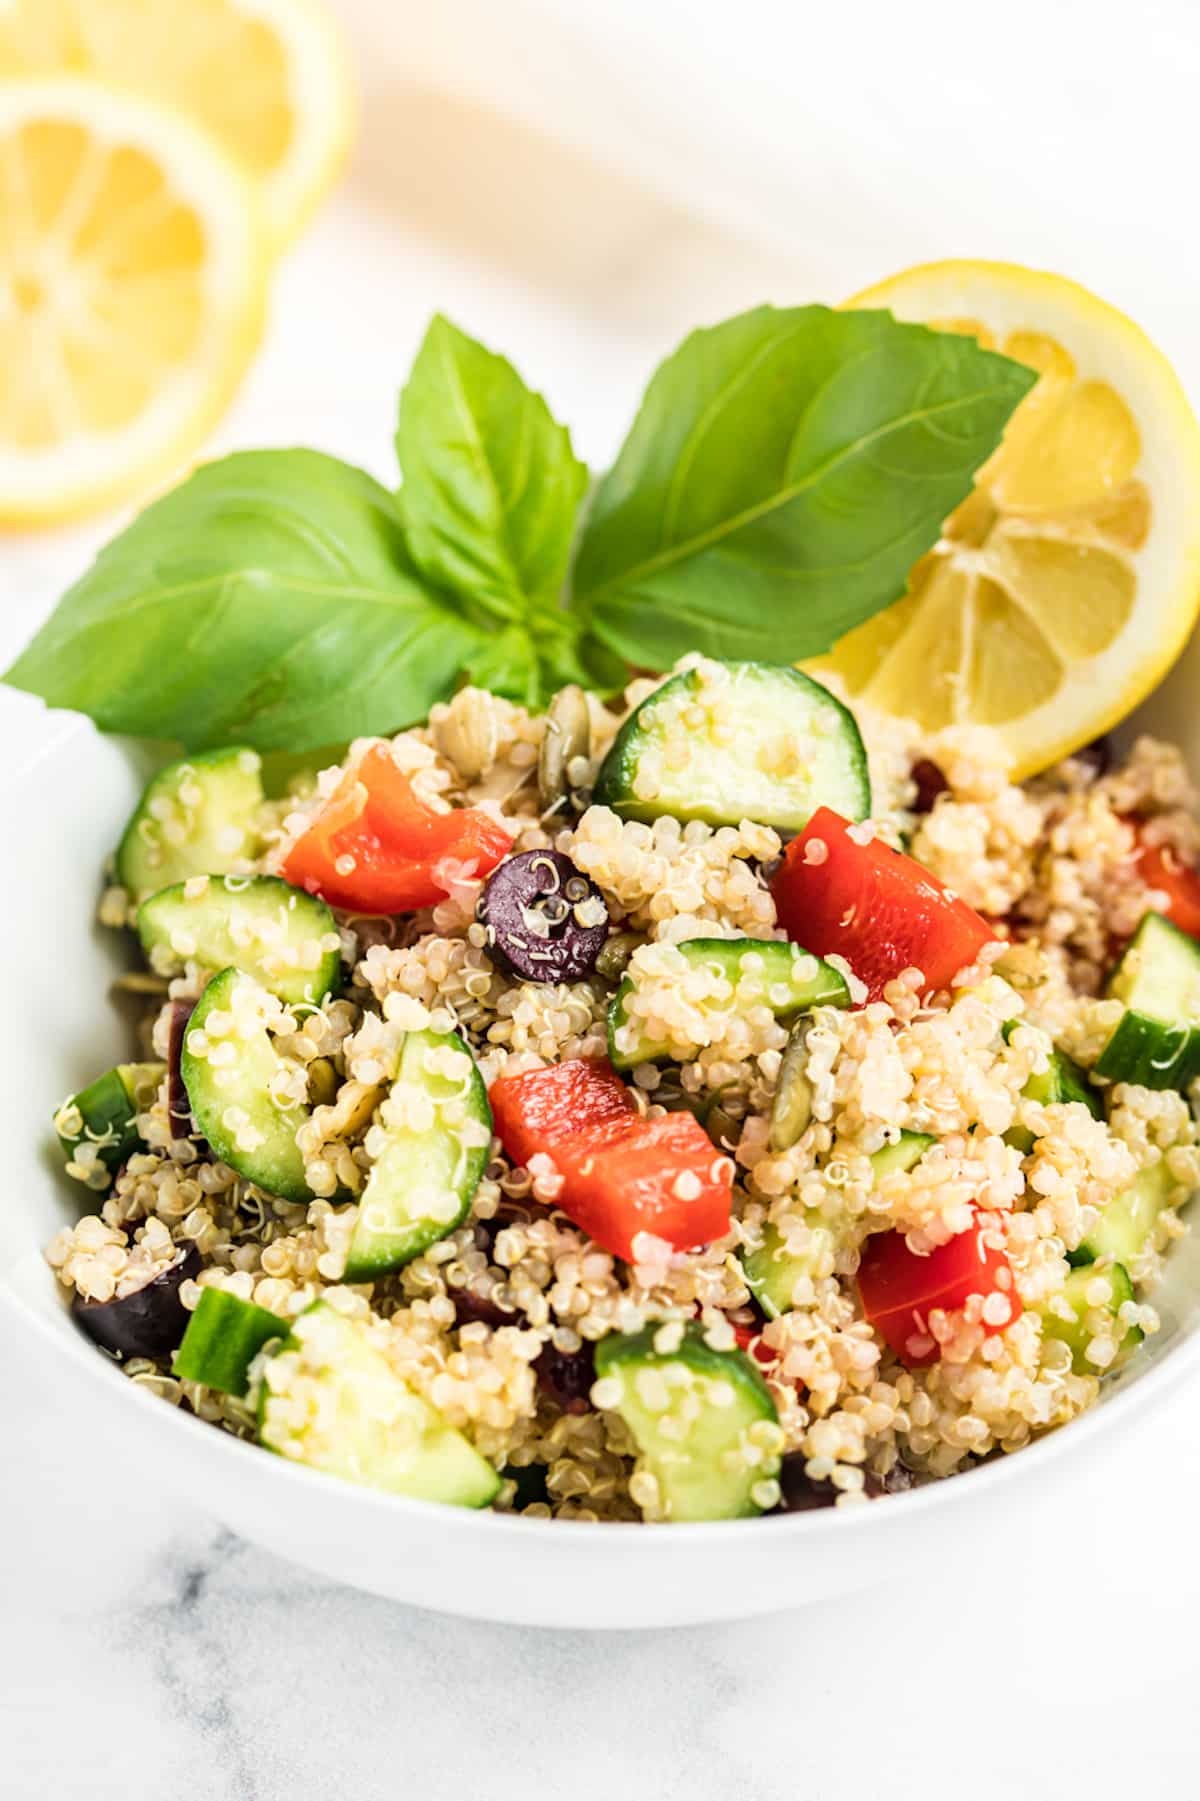 A bowl of quinoa salad with cucumbers, red pepper, and olives.